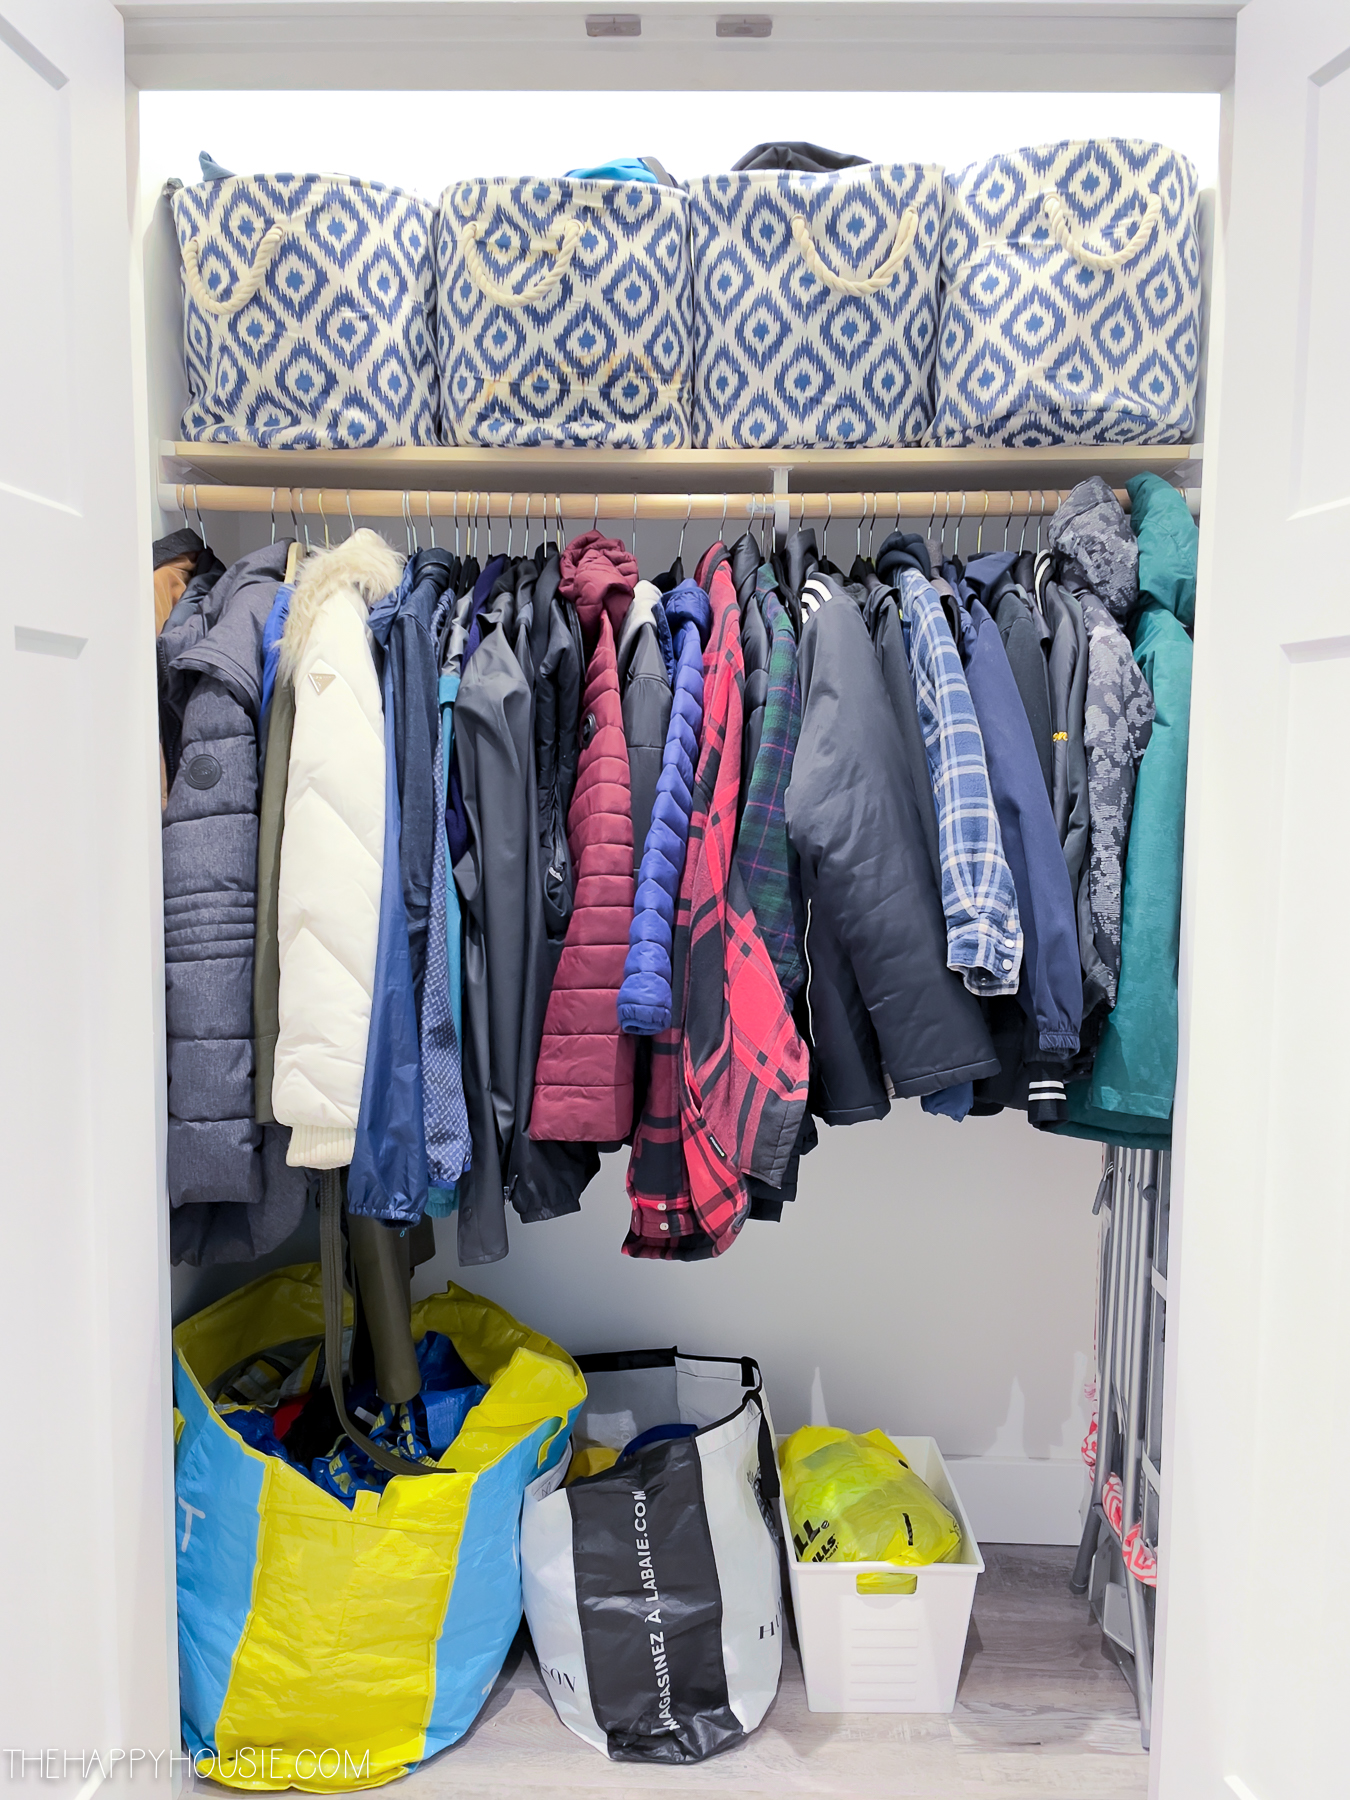 A closet by the door filled with coats, shopping bags and woven baskets on the top shelf.